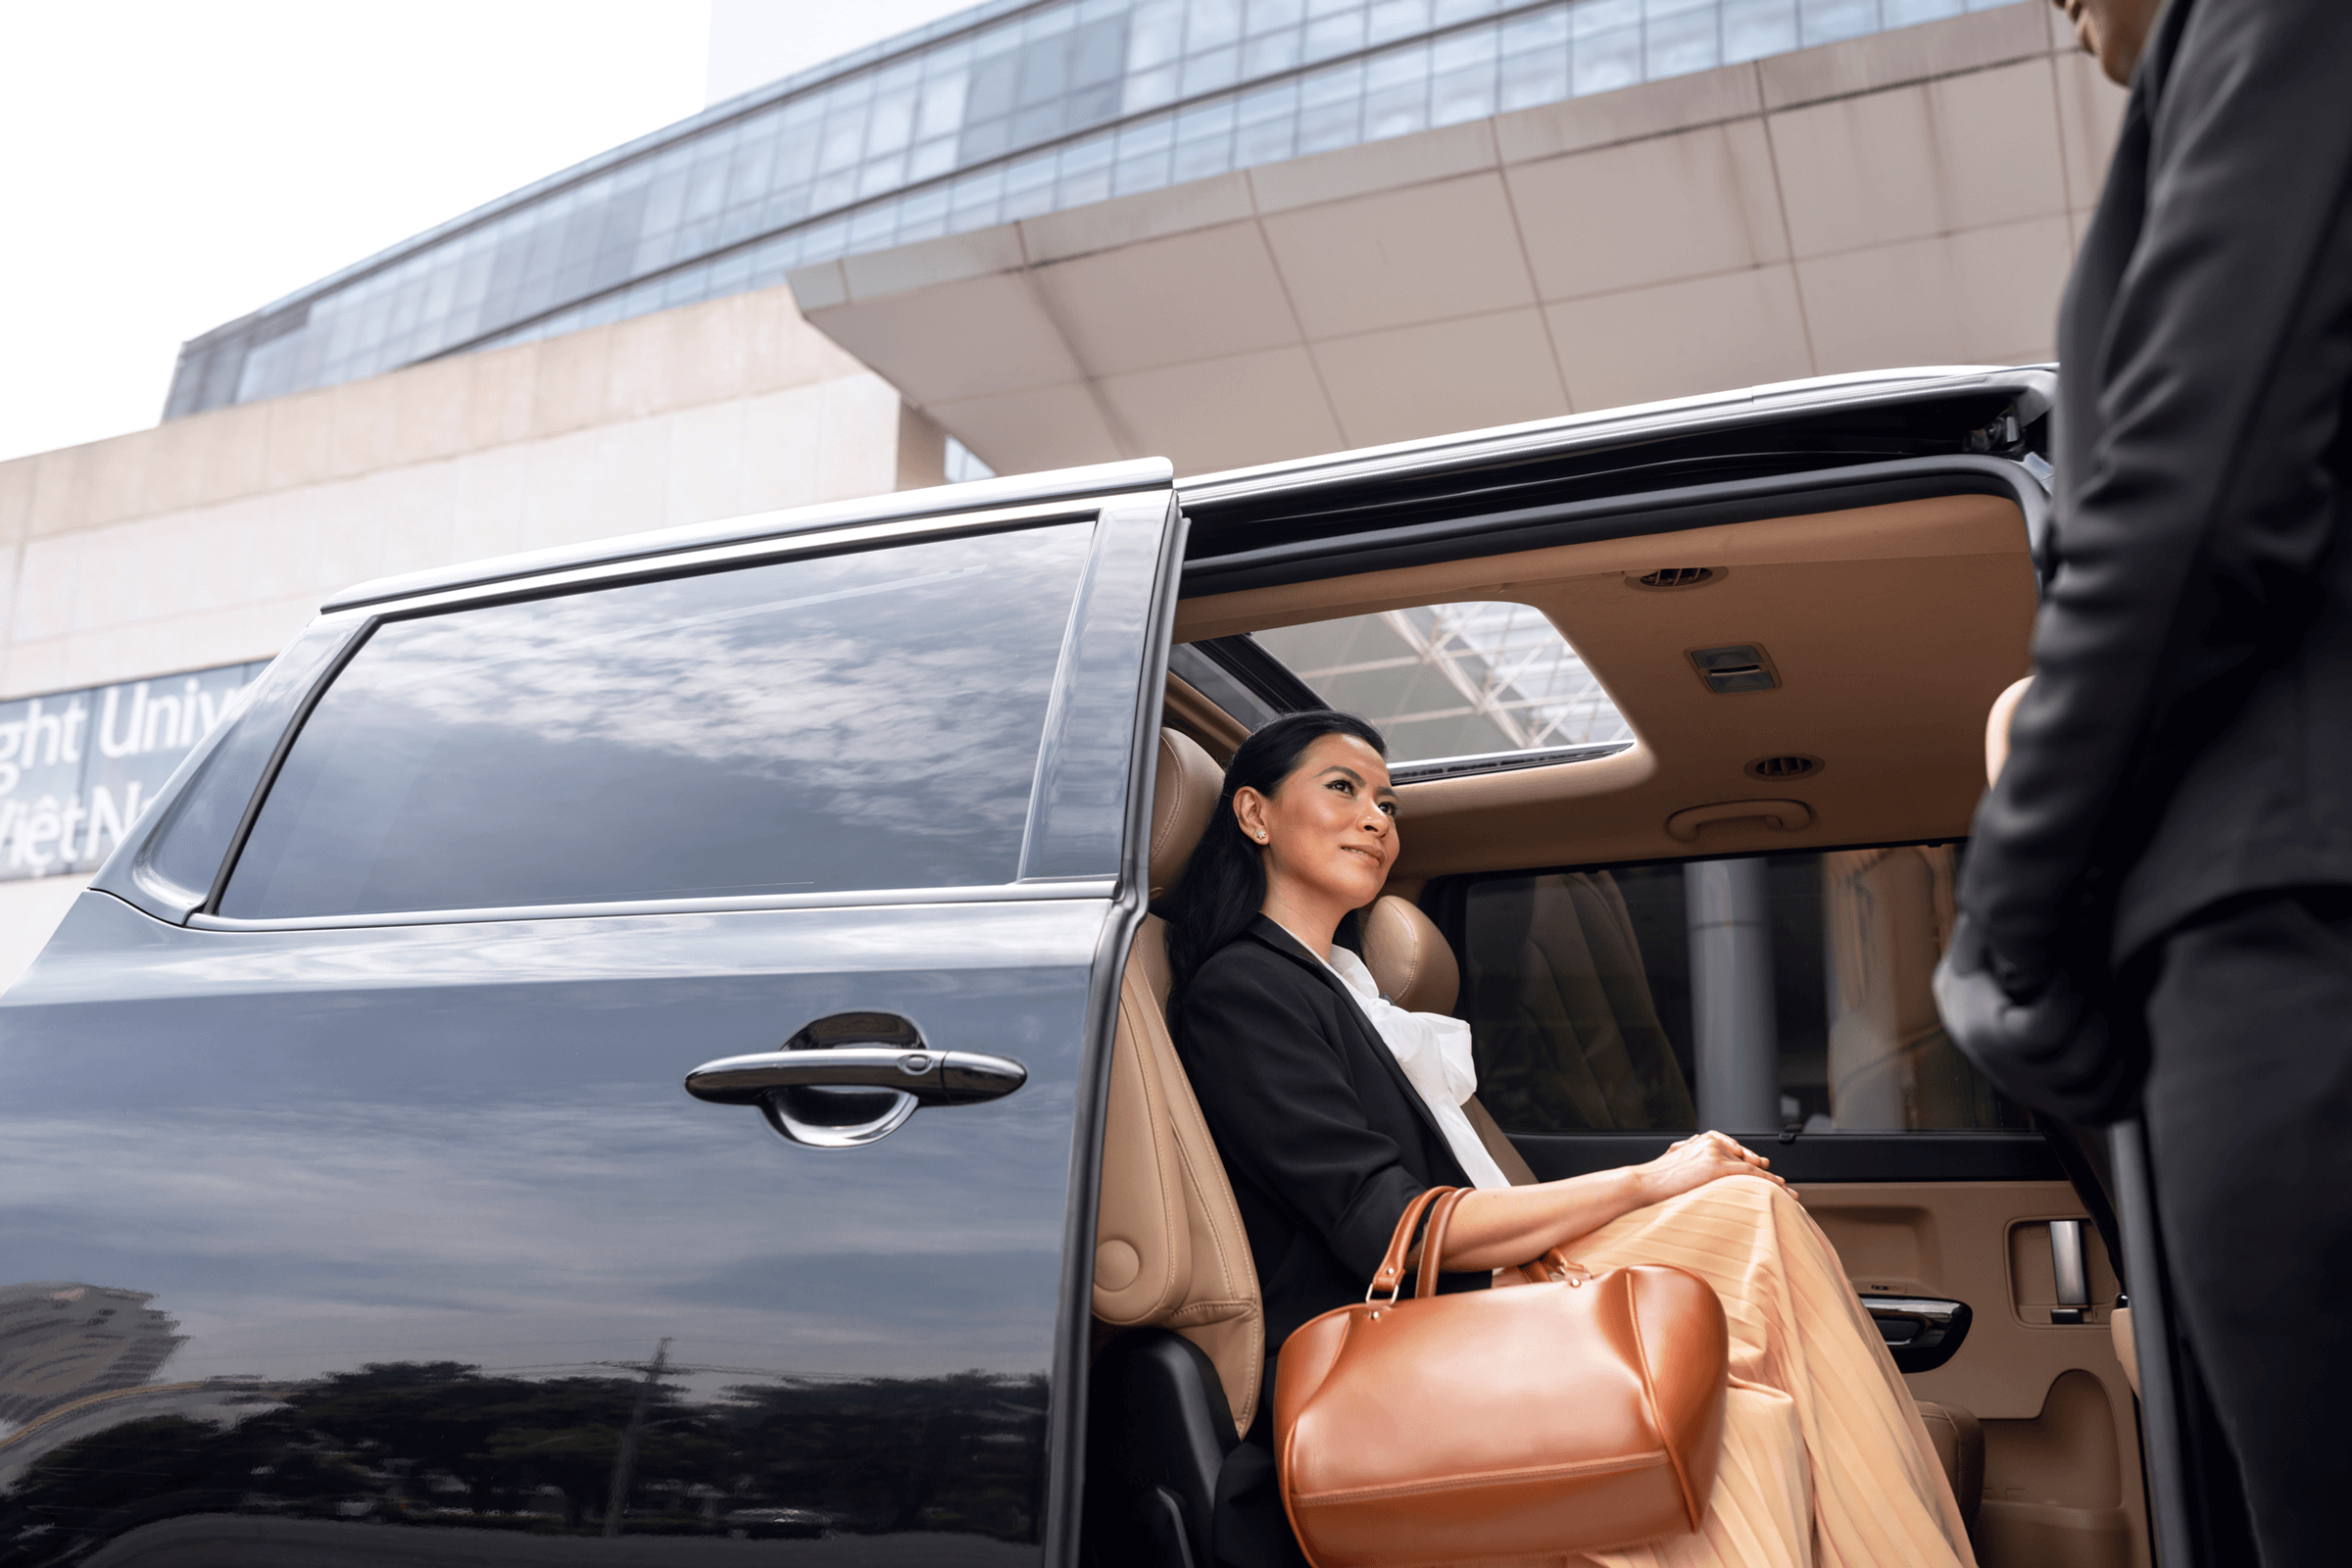 airport transfer, airport, transfer, airport transfer services, woman in van, classy woman, private taxi, personal chauffeur